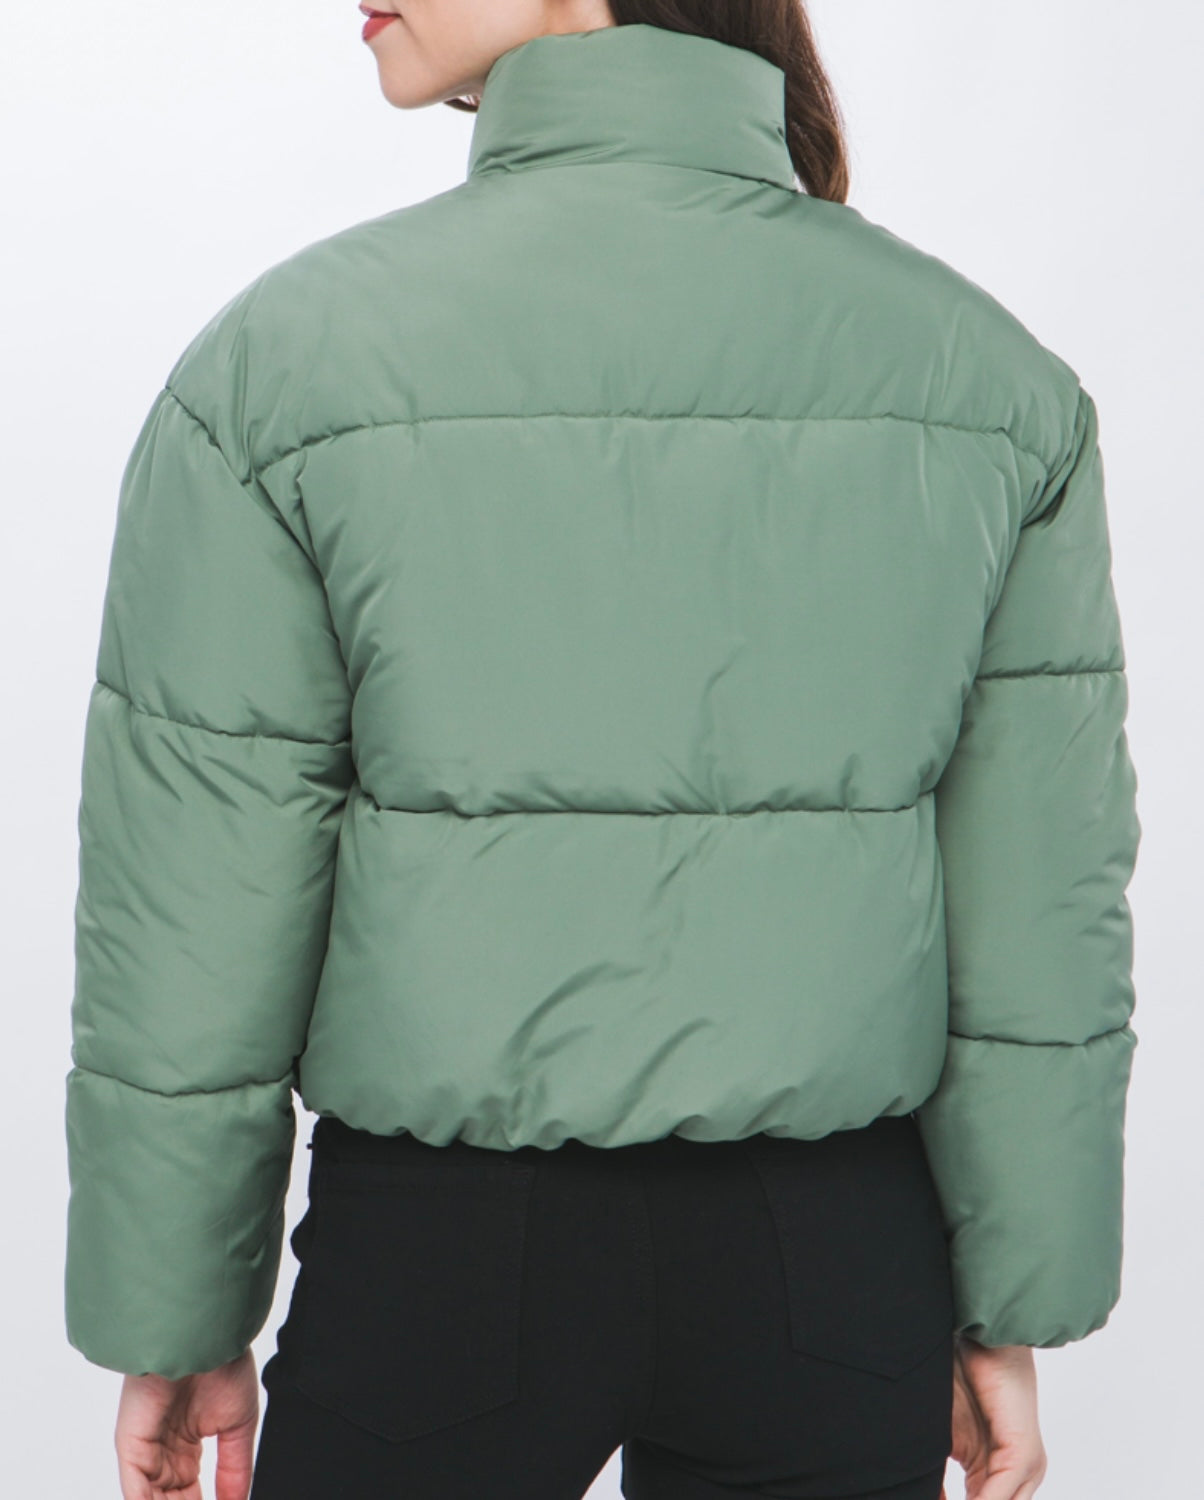 The “Major Trend” Puffer Jacket